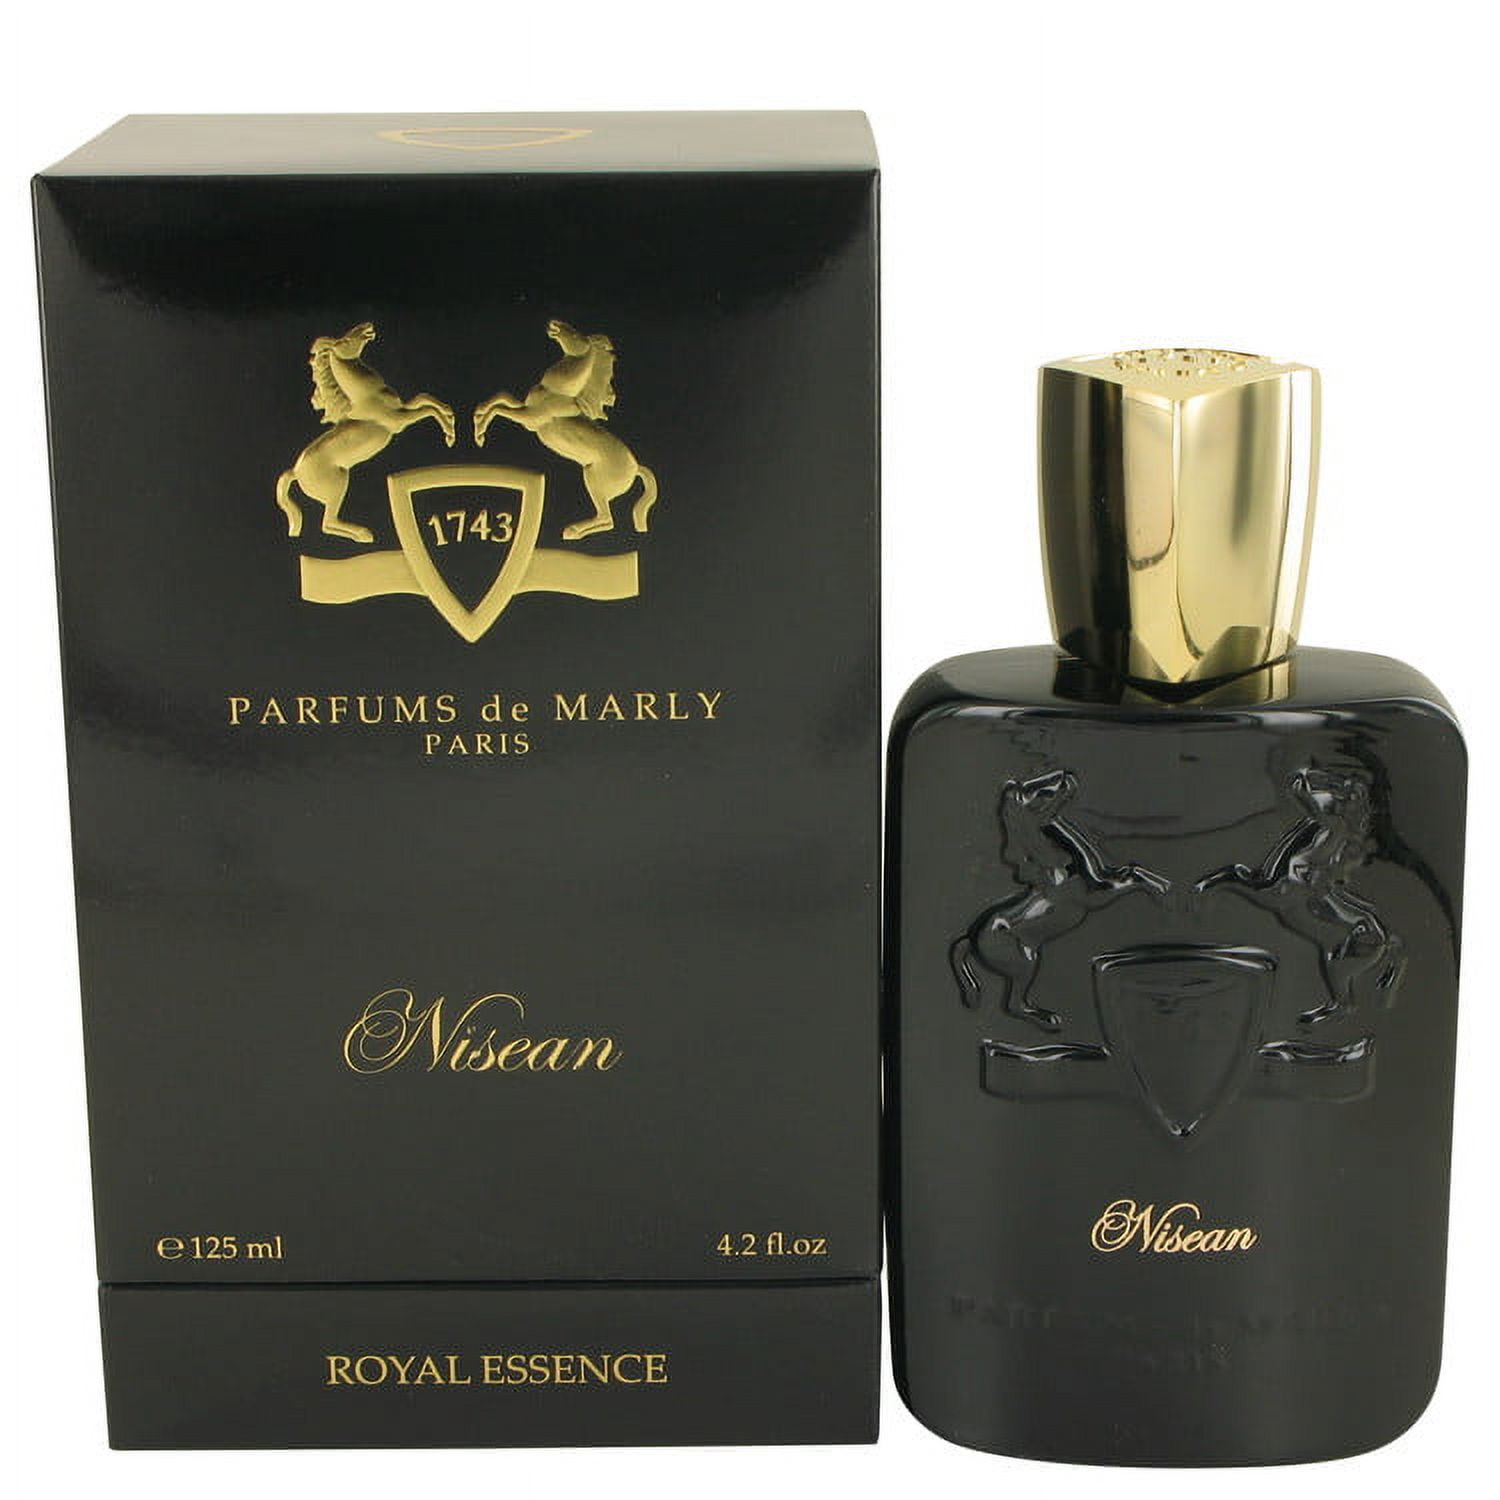 Darley by Parfums de Marly 4.2 oz EDT for men